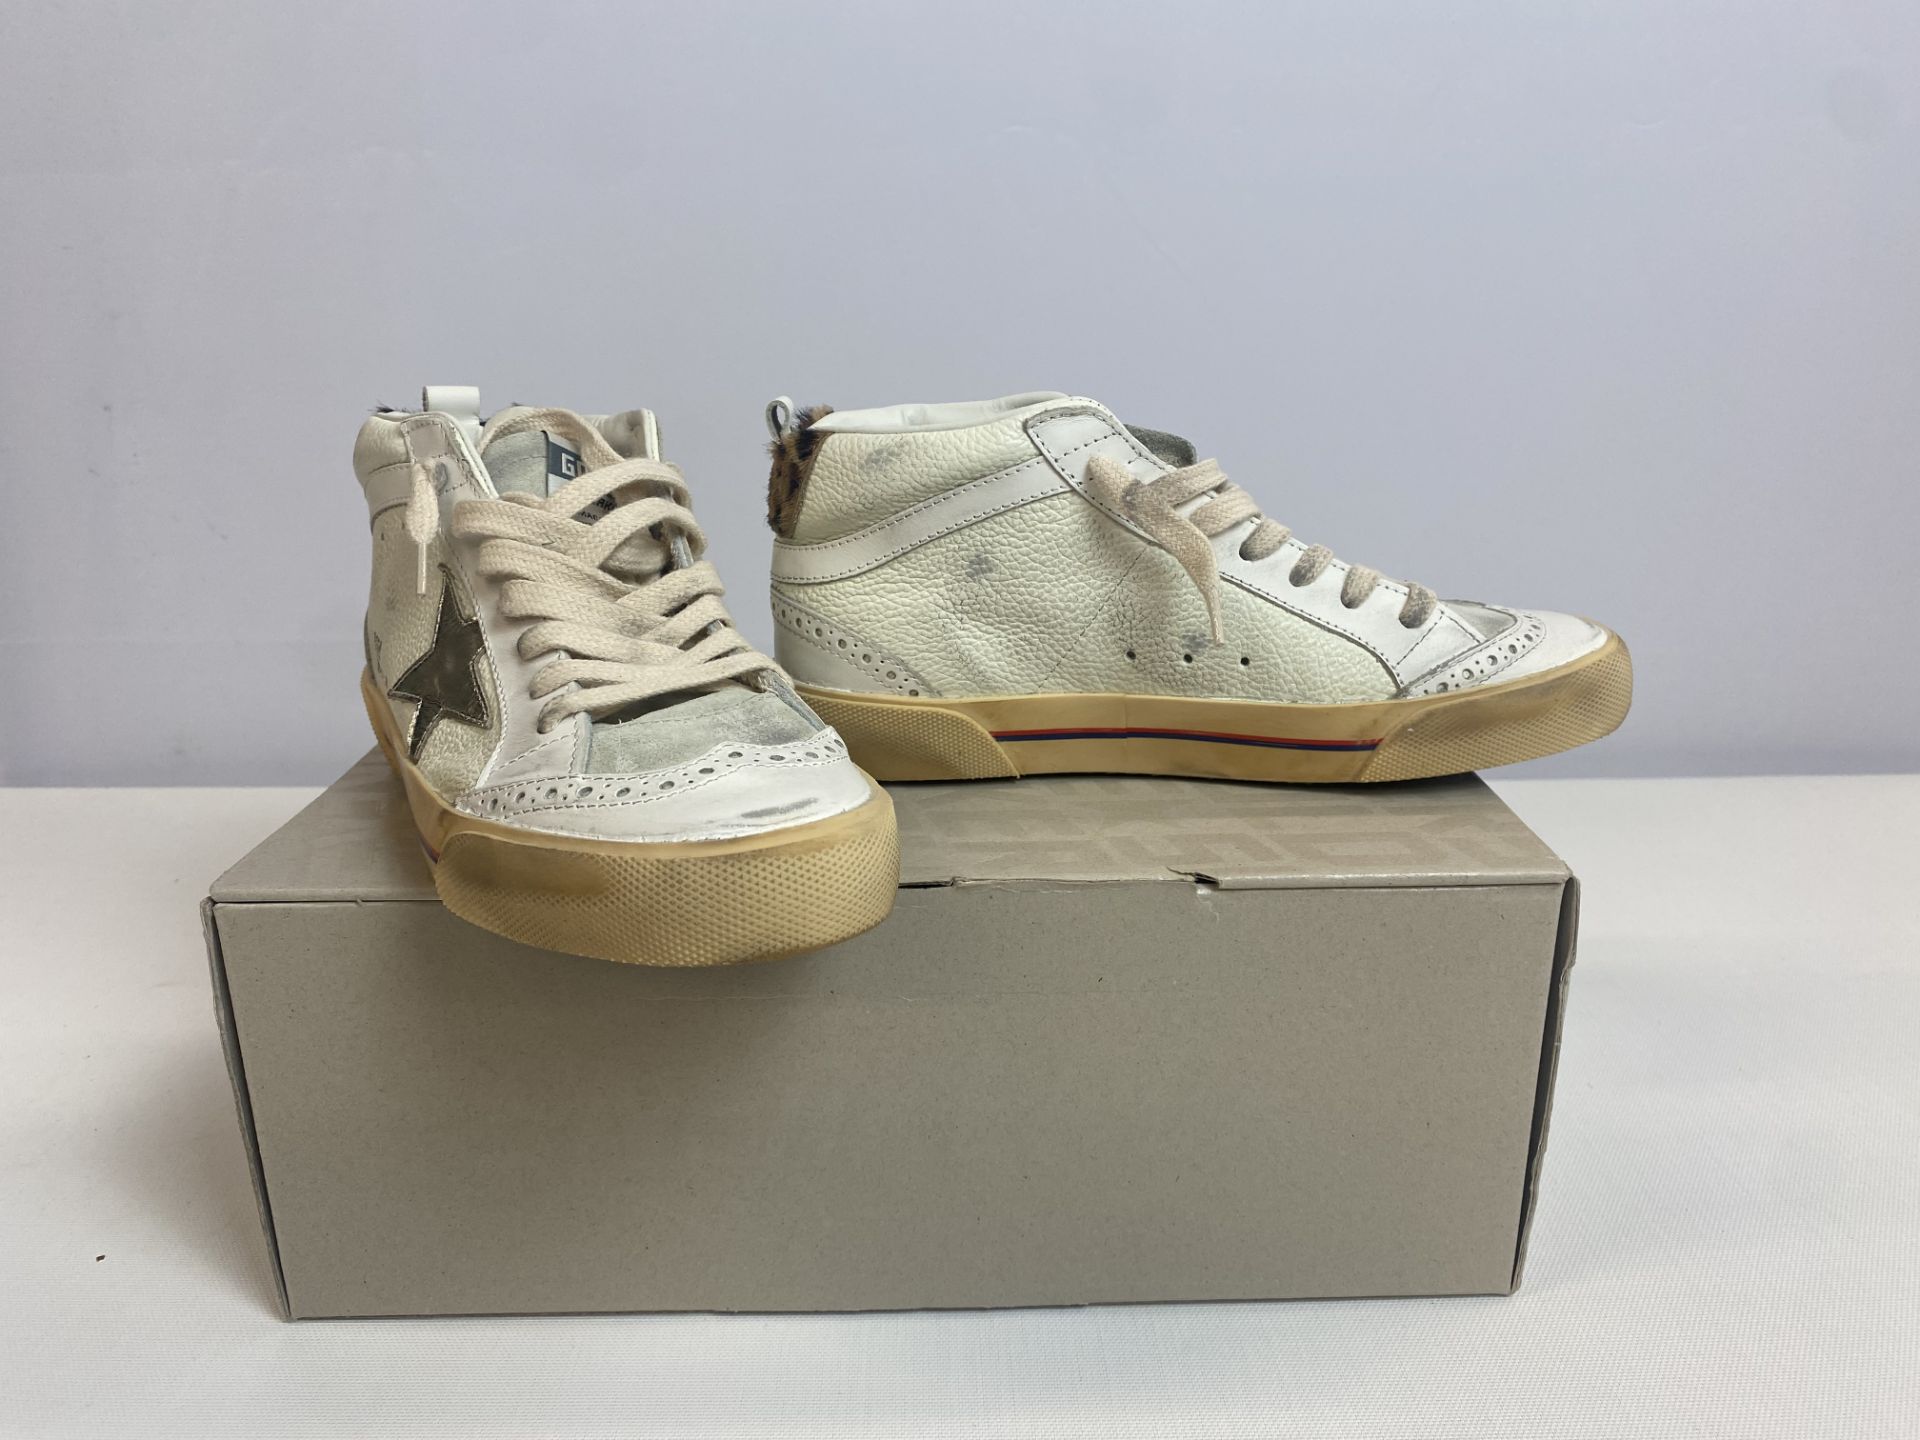 Golden Goose SNKR MIDSTAR SIMID STAR CLASSIC, Size: 36, Color: WHITE, Retail Price: $600